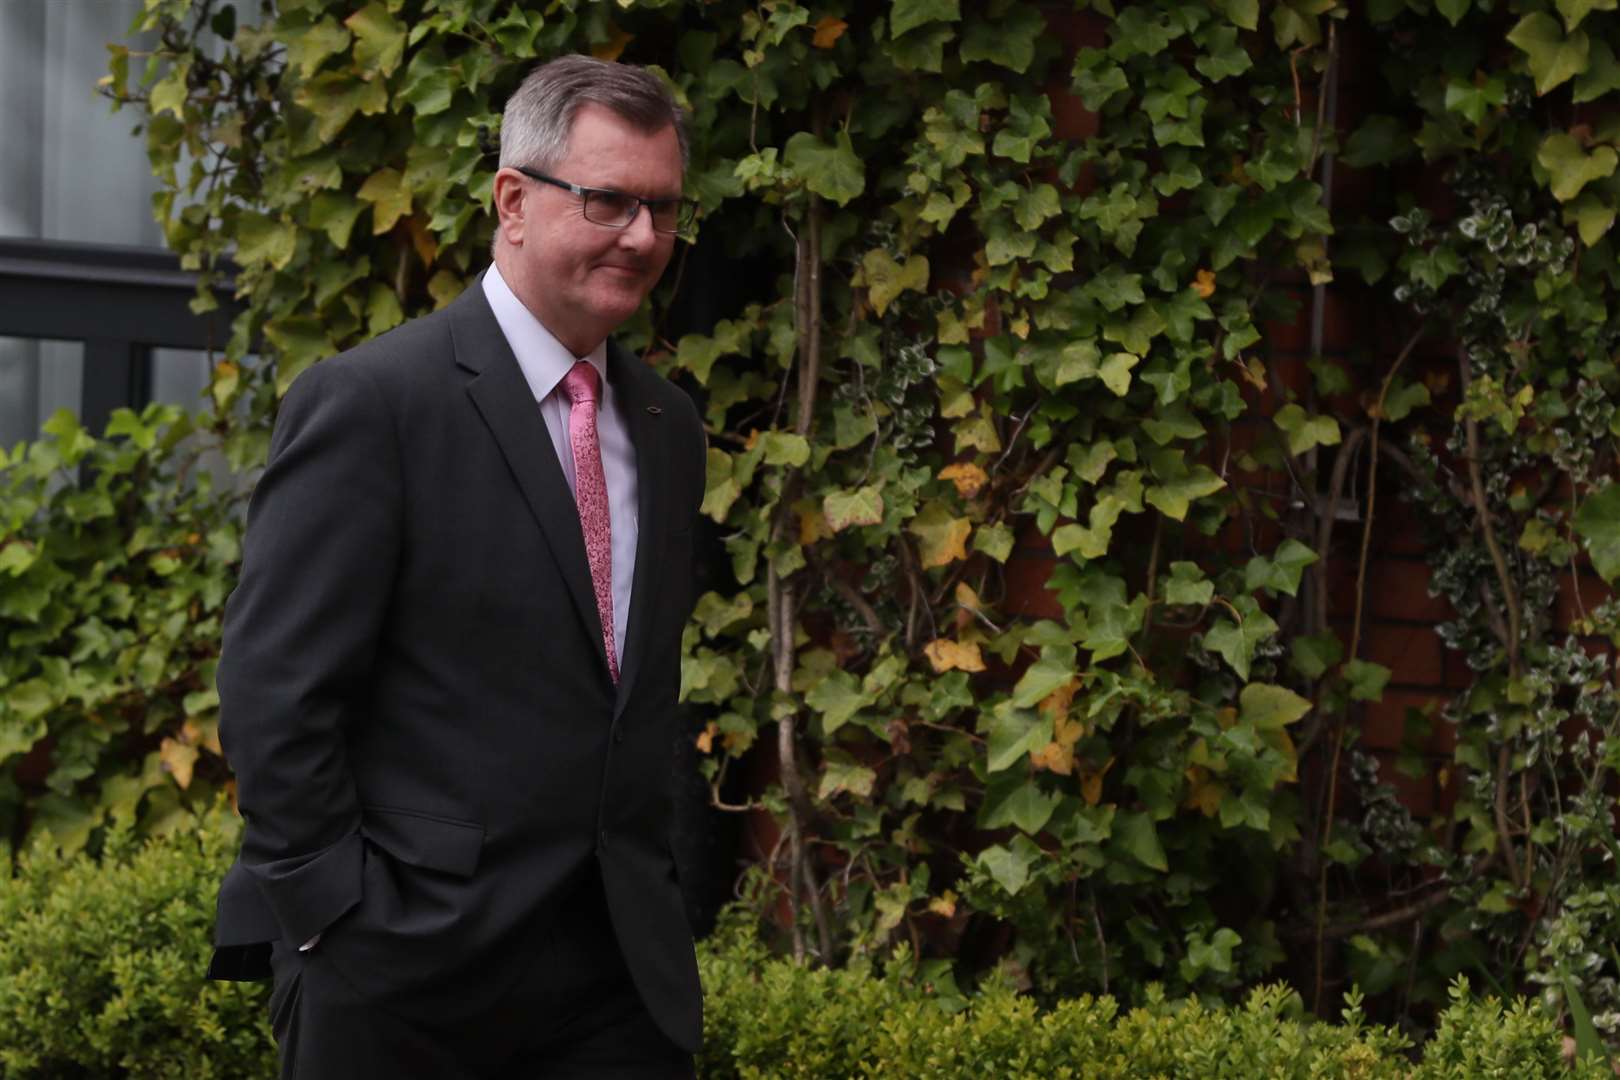 Lagan Valley MP, Sir Jeffrey Donaldson, is expected to put his name forward to become DUP leader (Brian Lawless/PA)